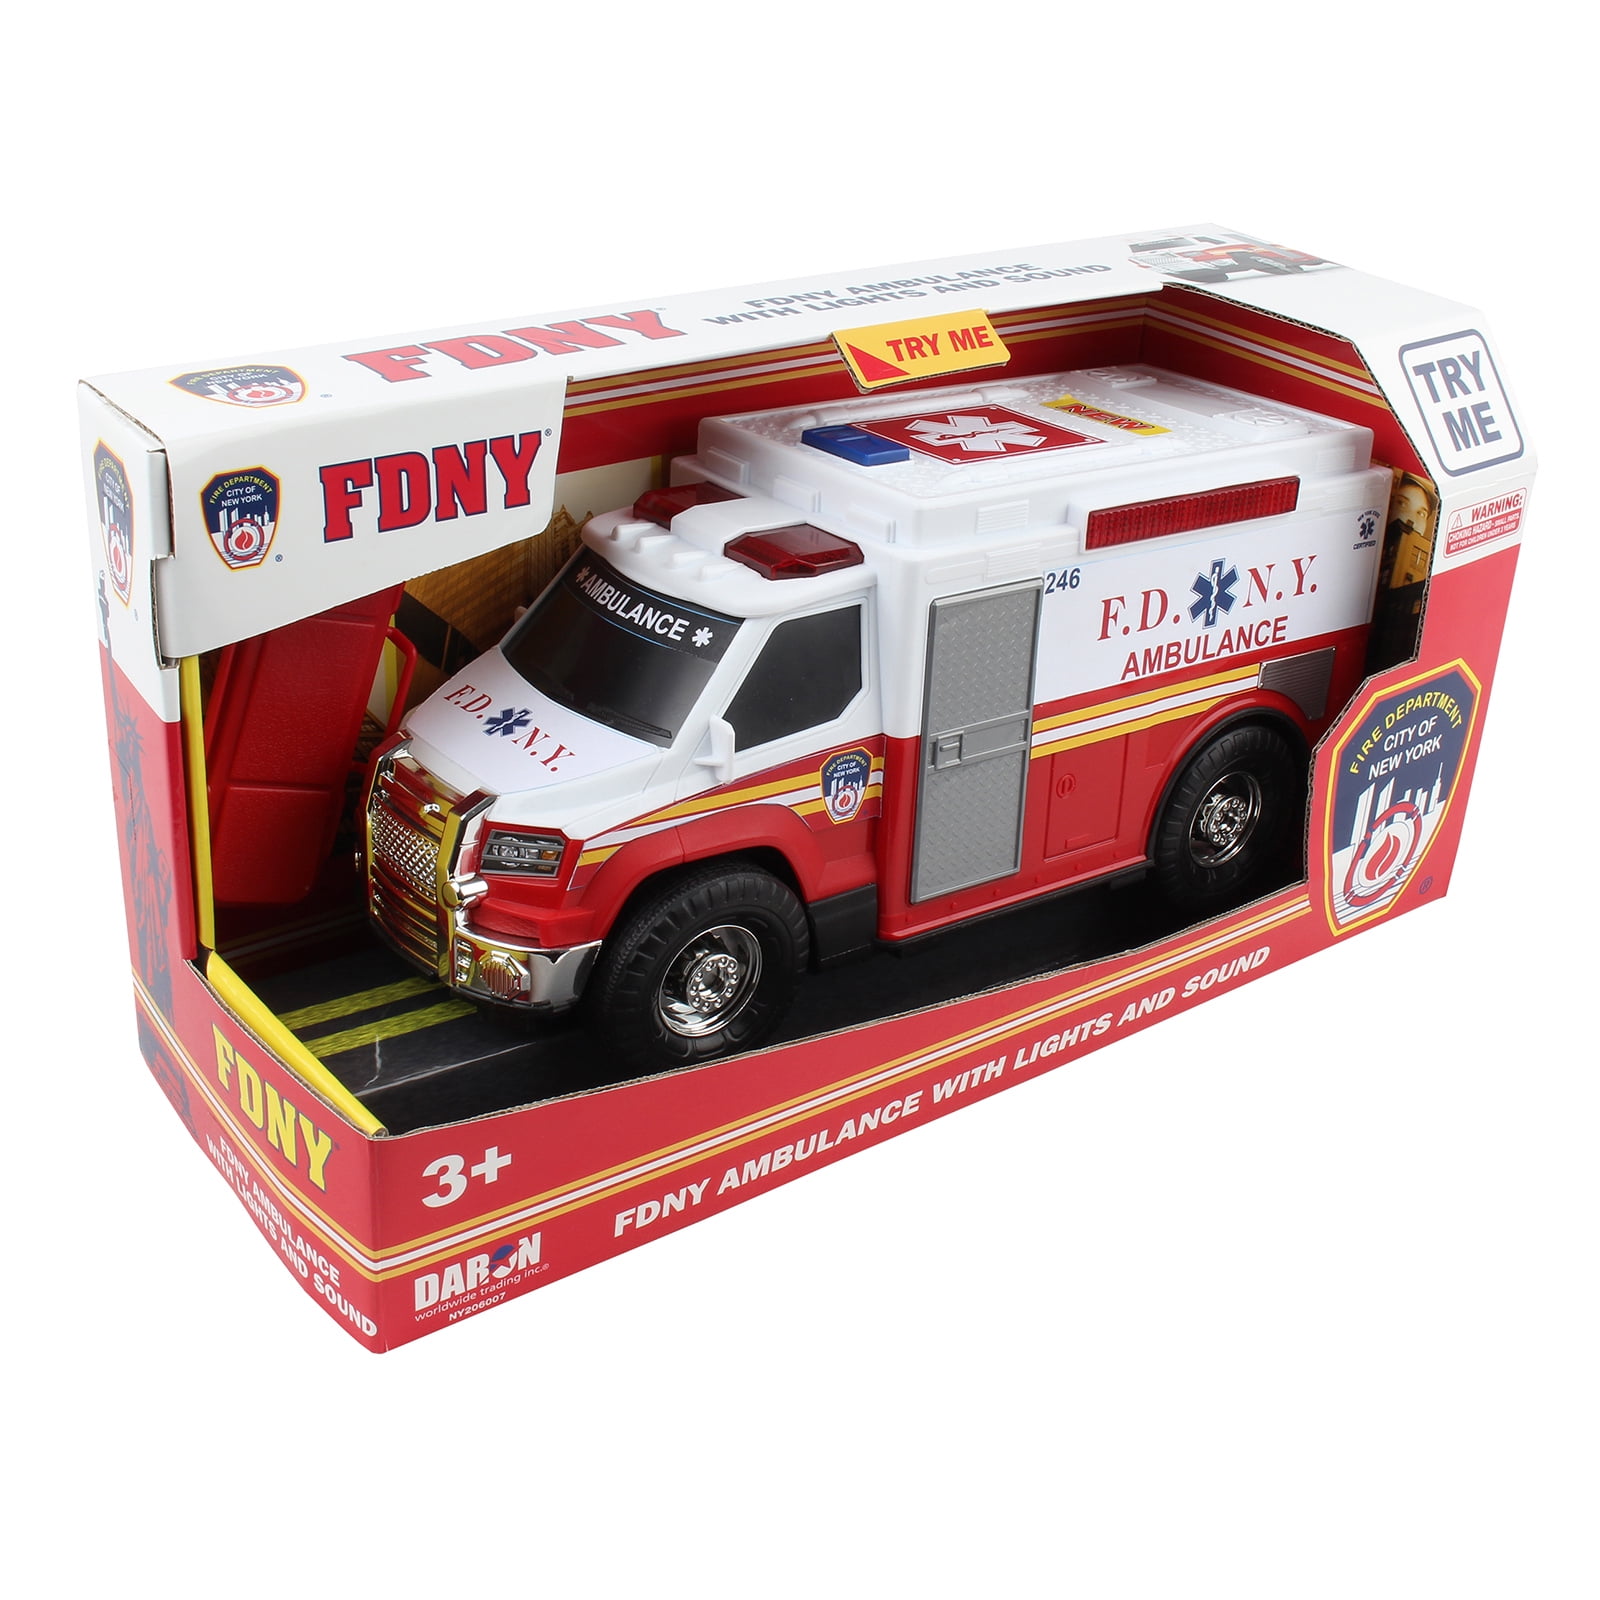 Ny206007 4.5 X 12 In. Fdny Ambulance With Lights & Sound